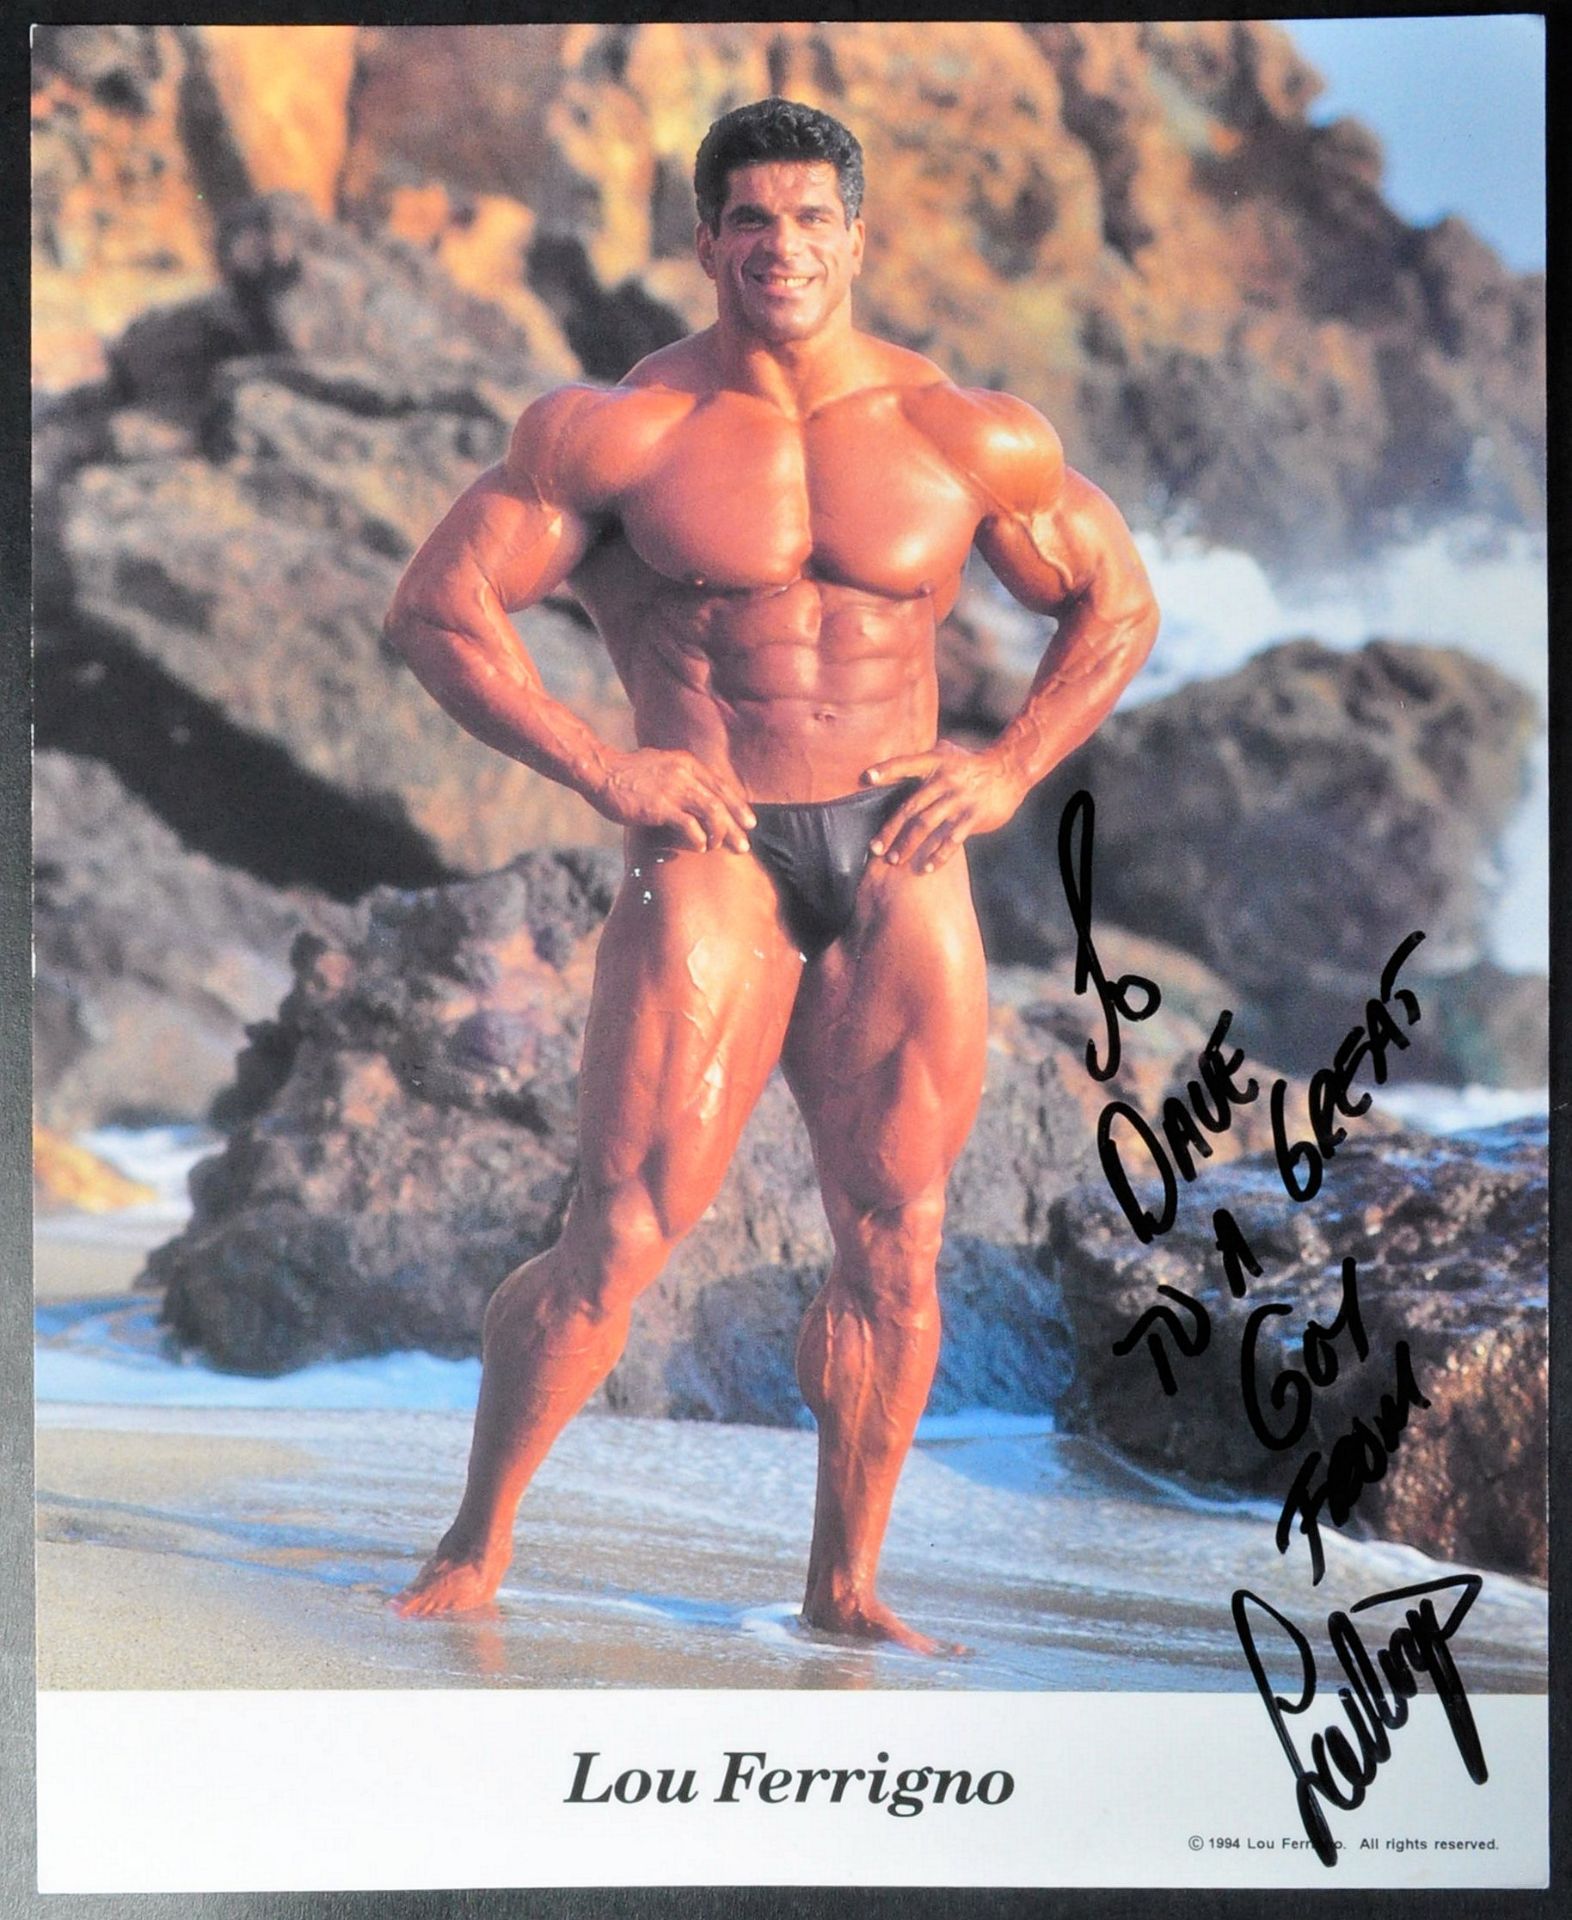 ESTATE OF DAVE PROWSE - LOU FERRIGNO - SIGNED PHOTOGRAPH